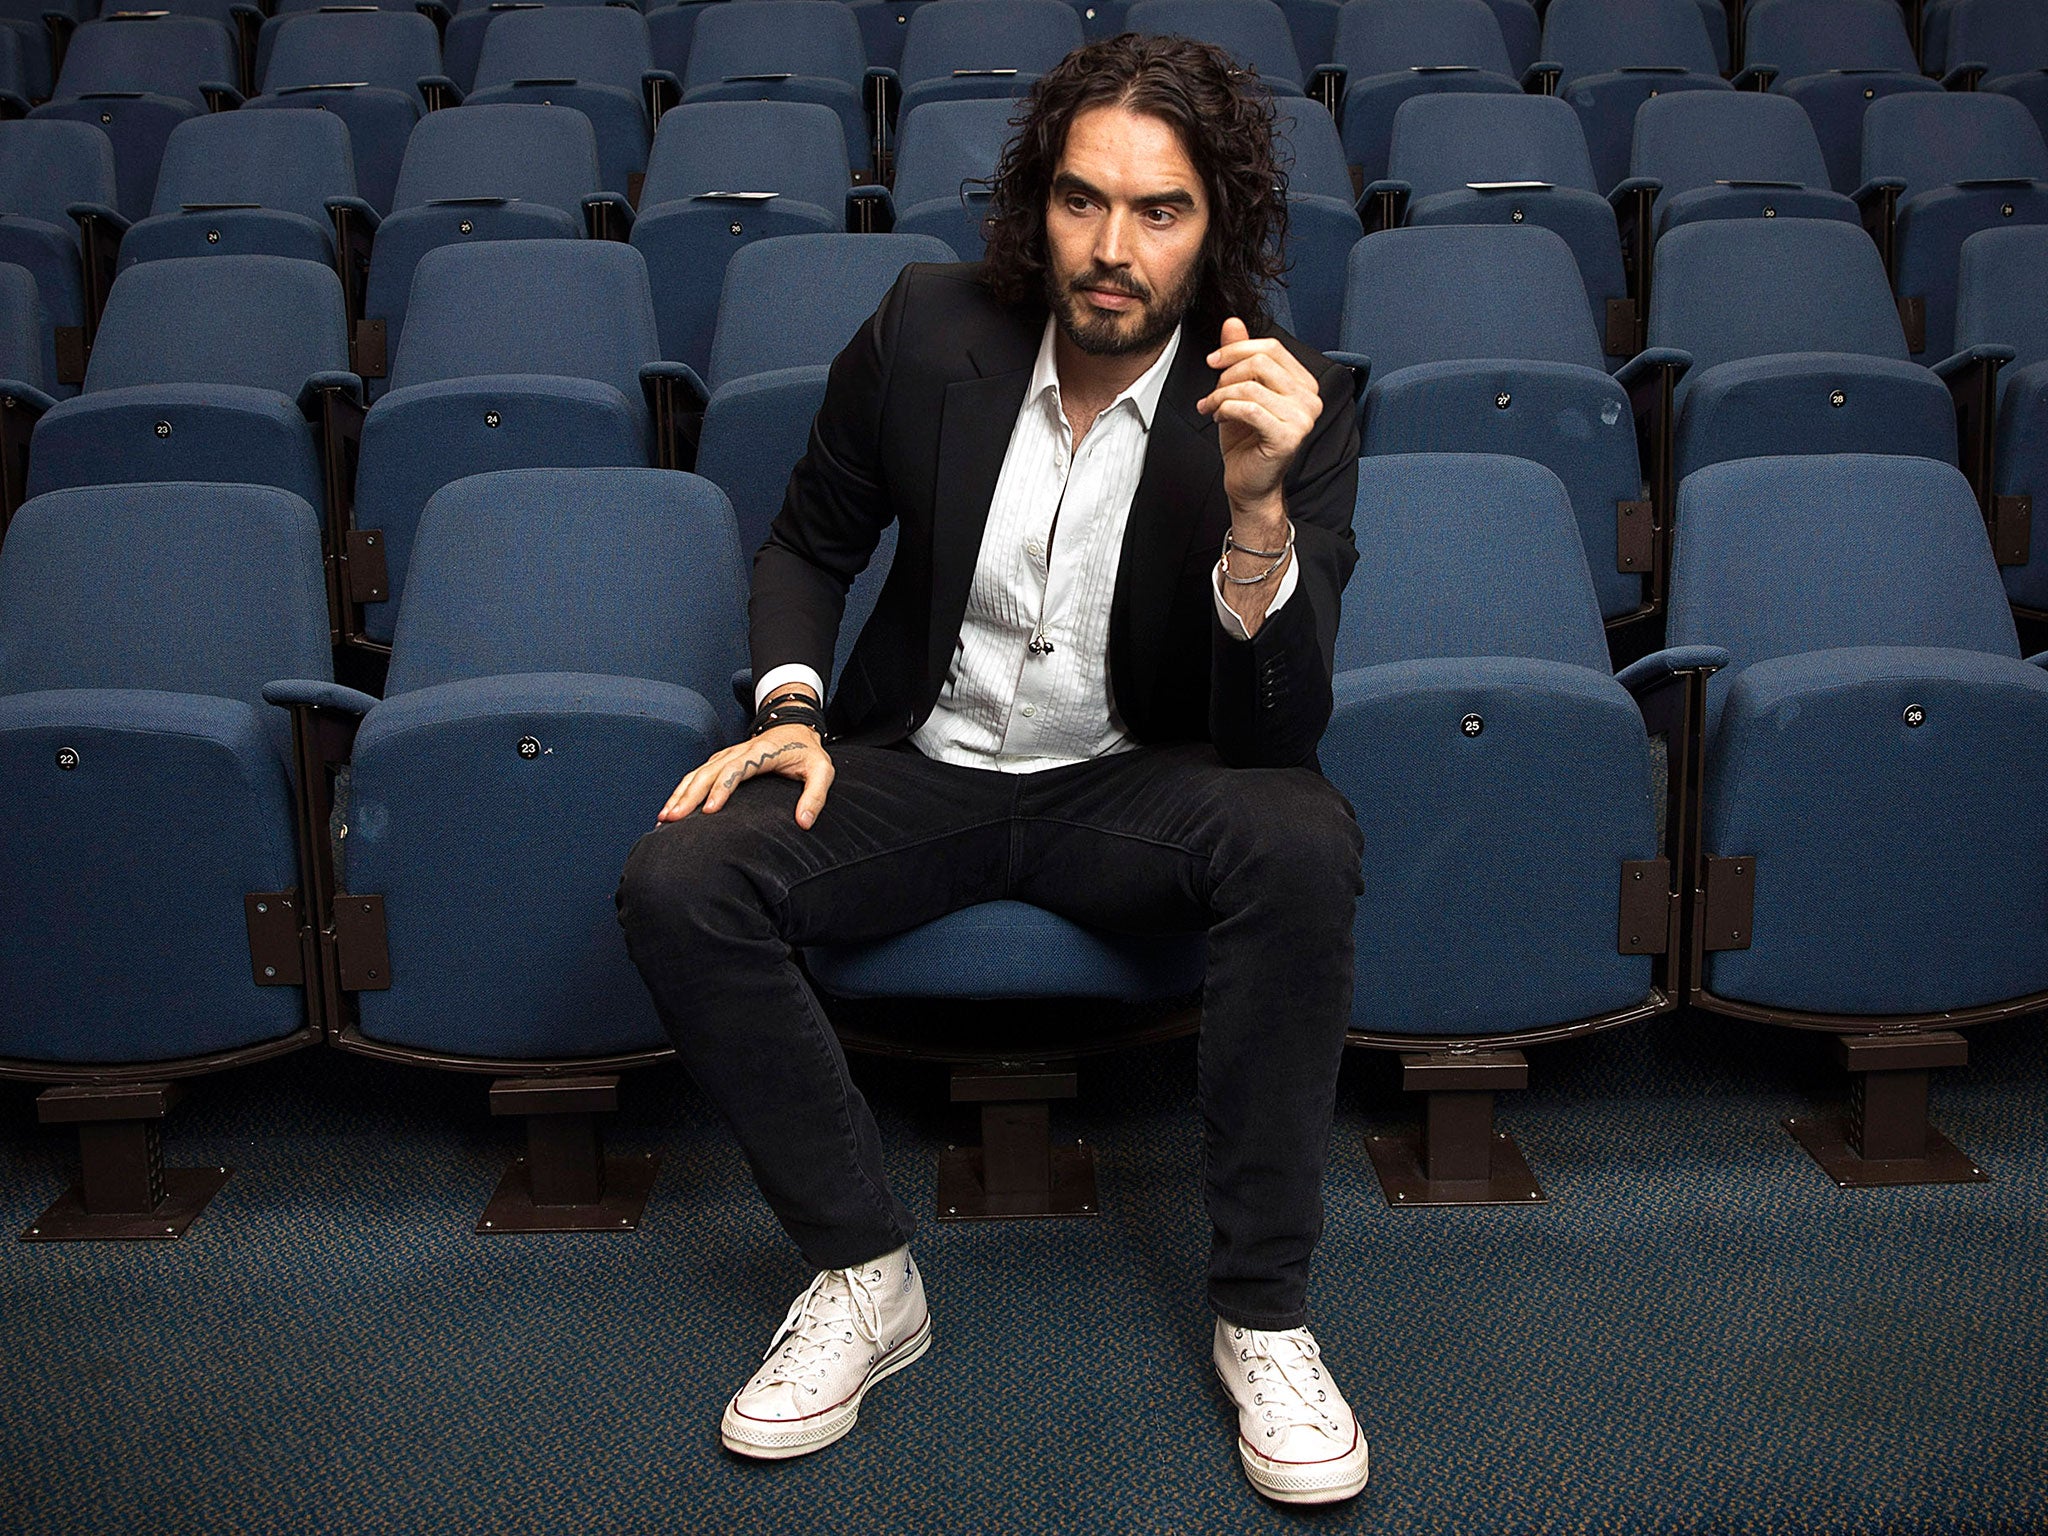 Russell Brand says he'd vote for Syriza